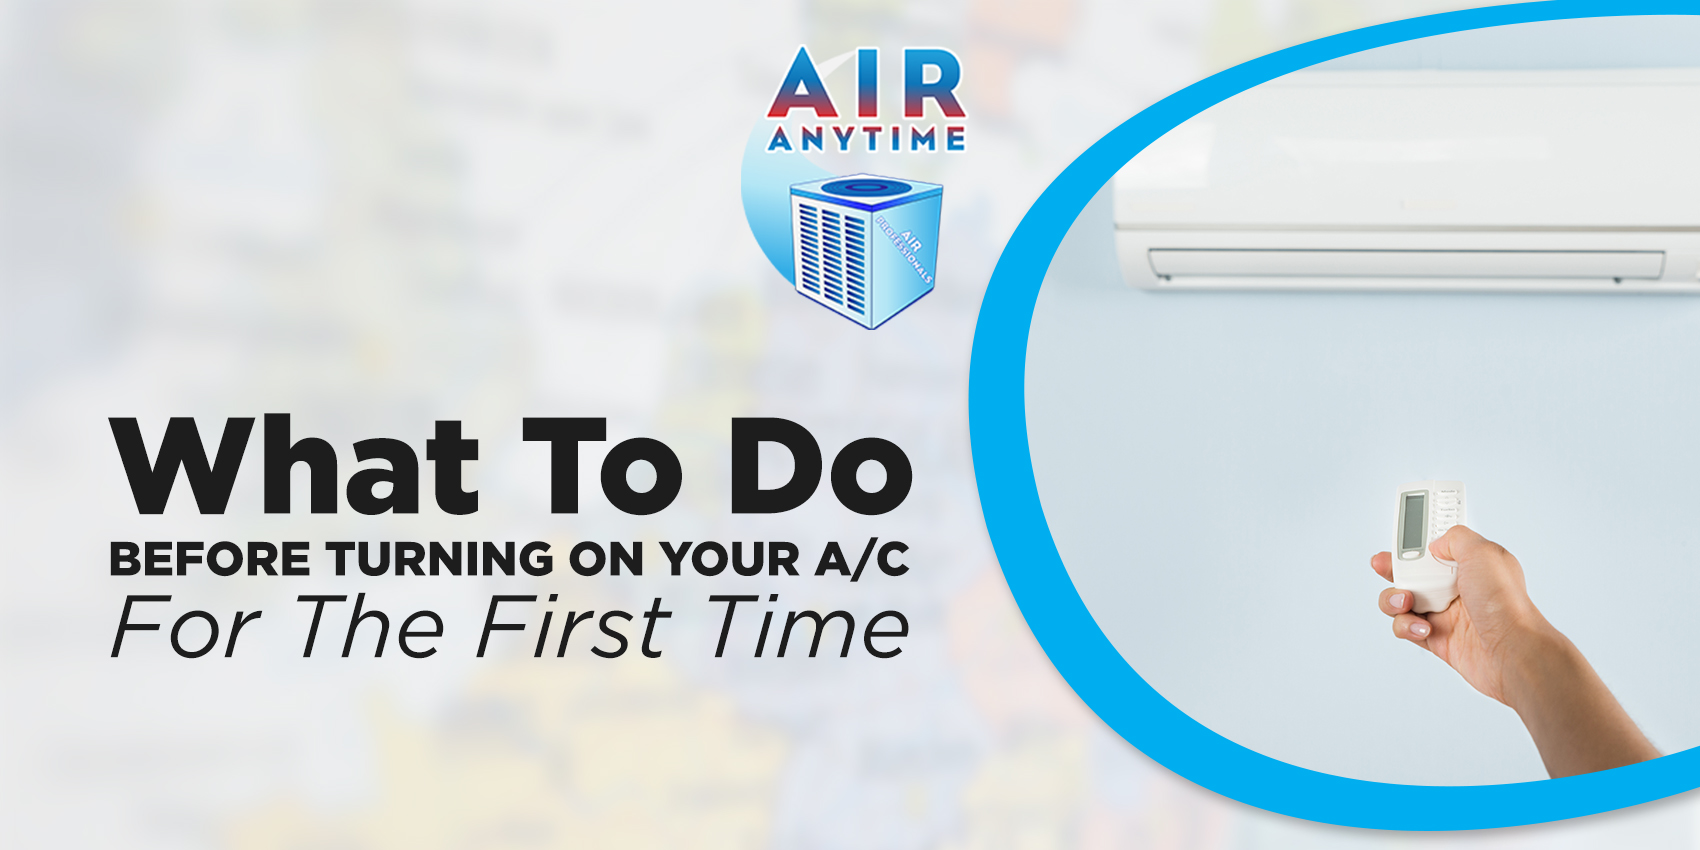 What To Do Before Turning On Your A/C For The First Time